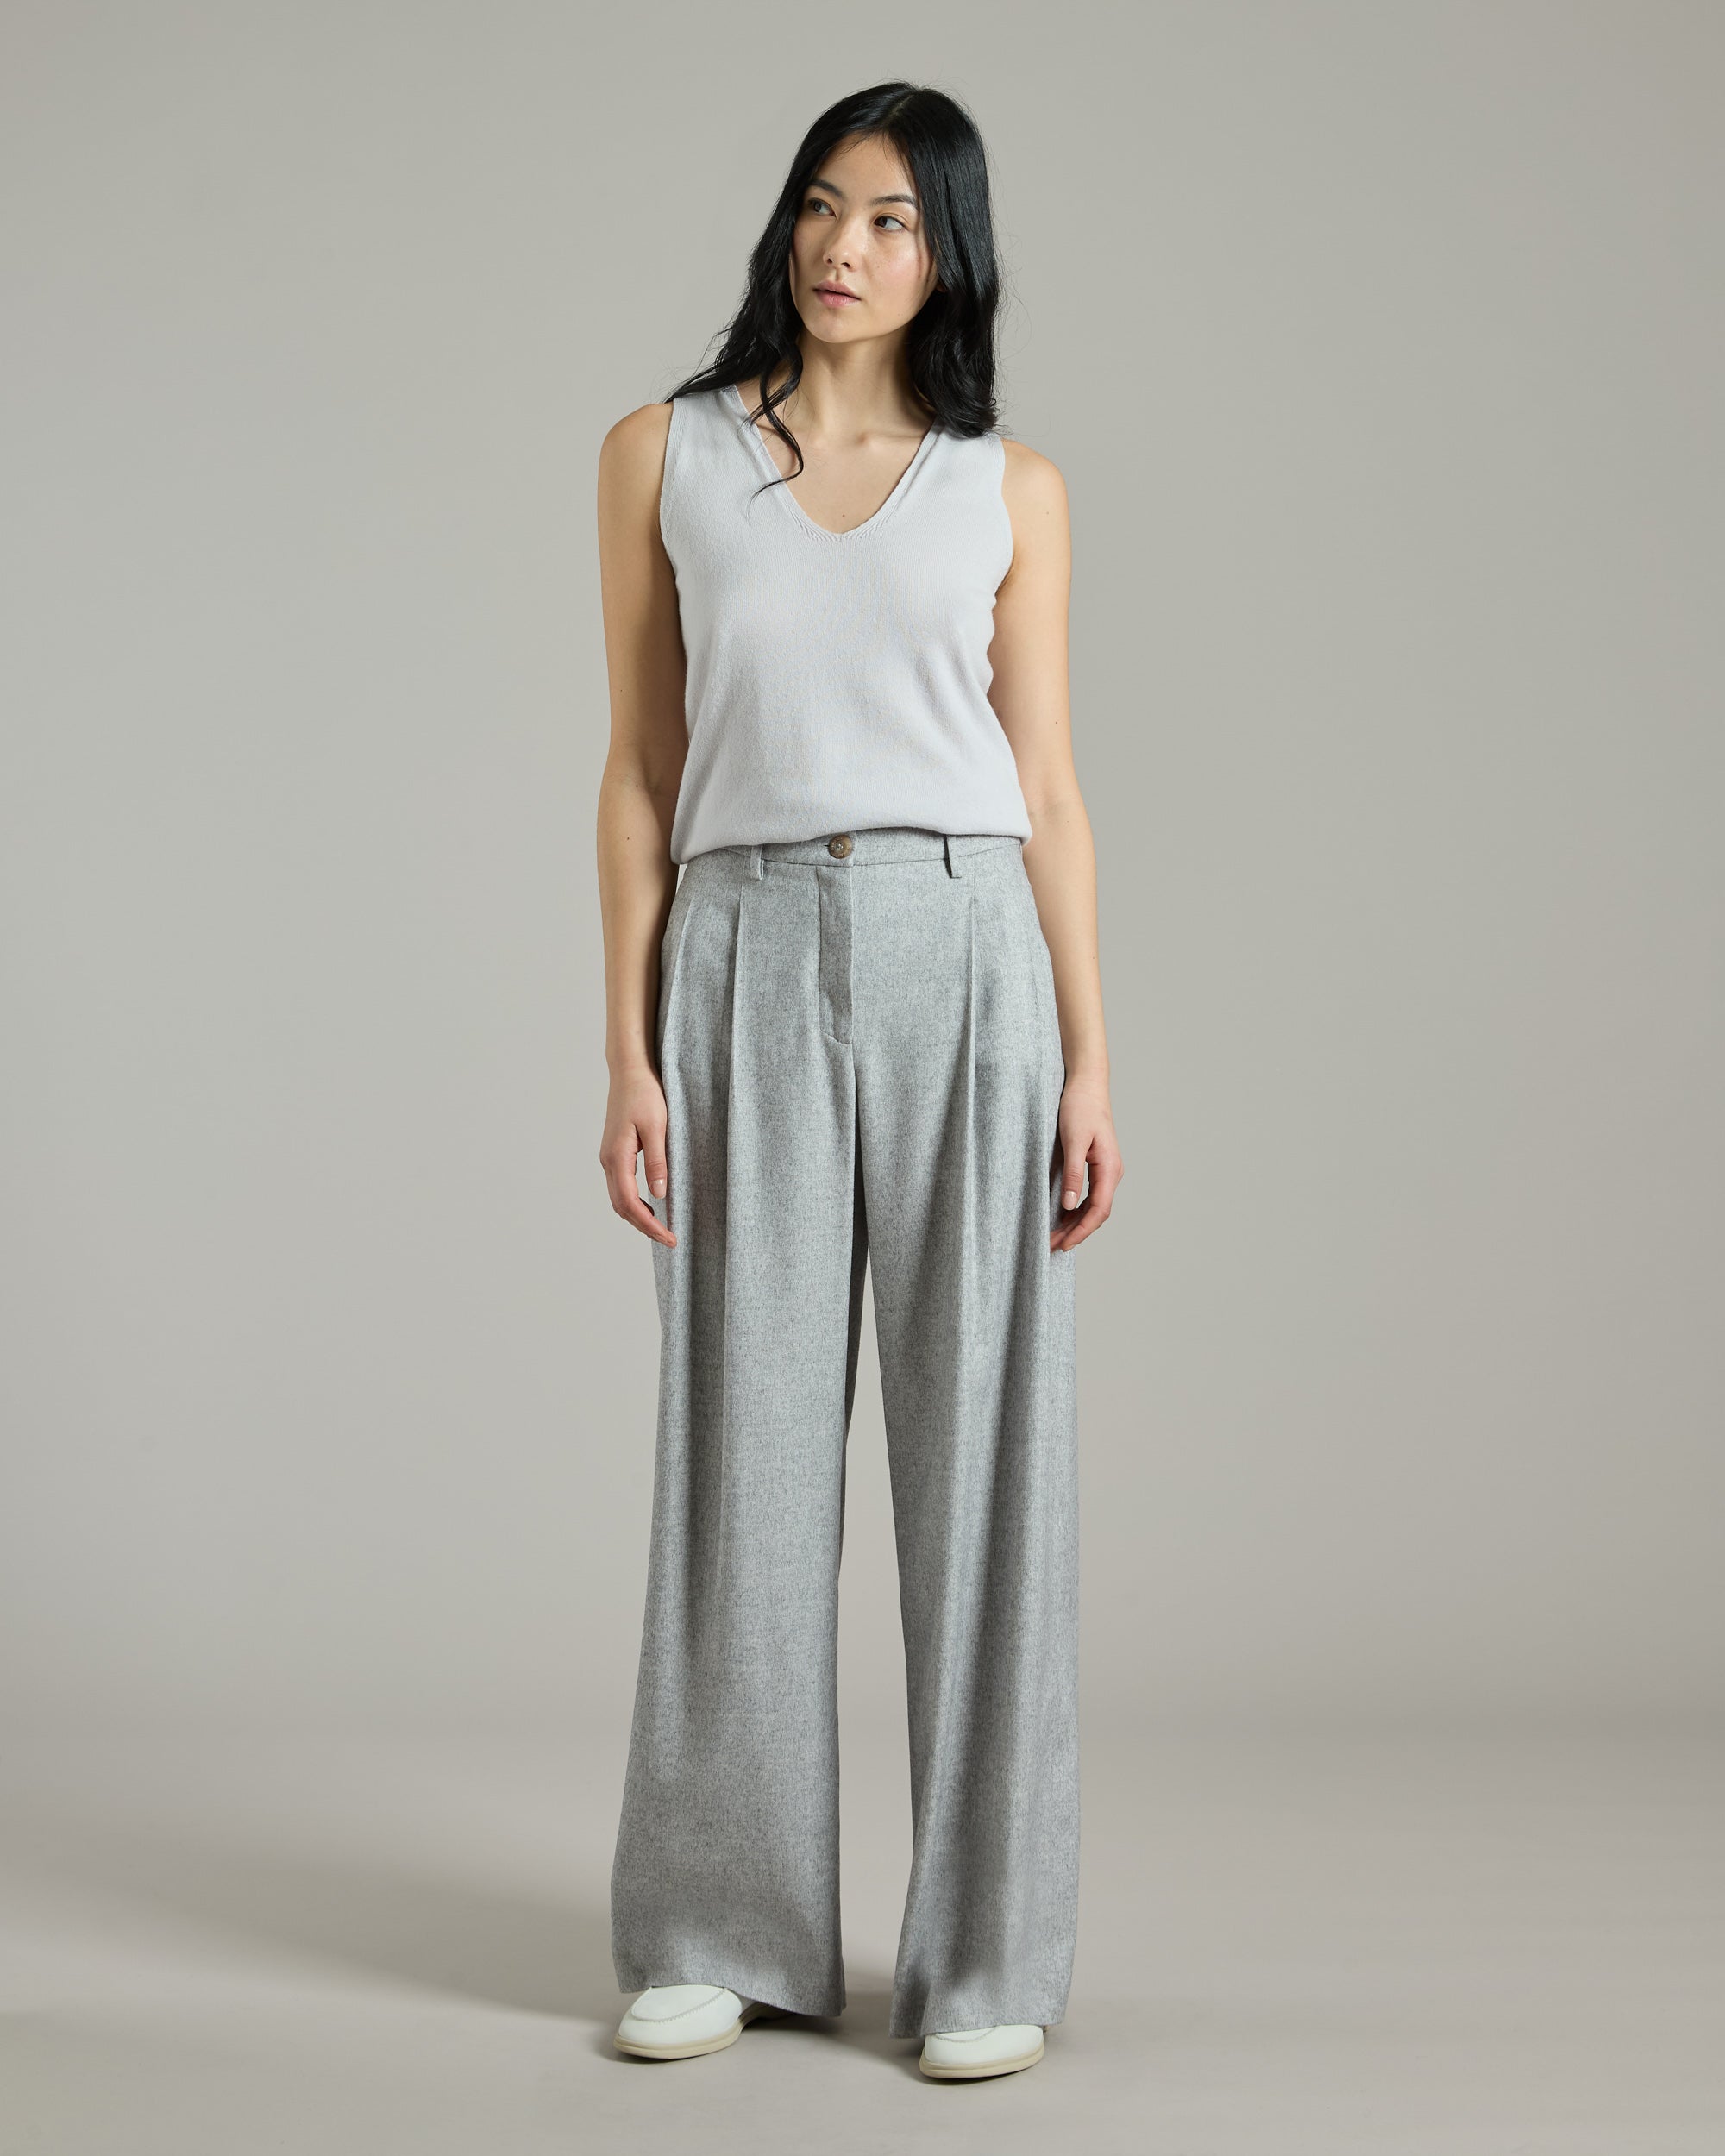 Gray Cashmere and Silk Pants